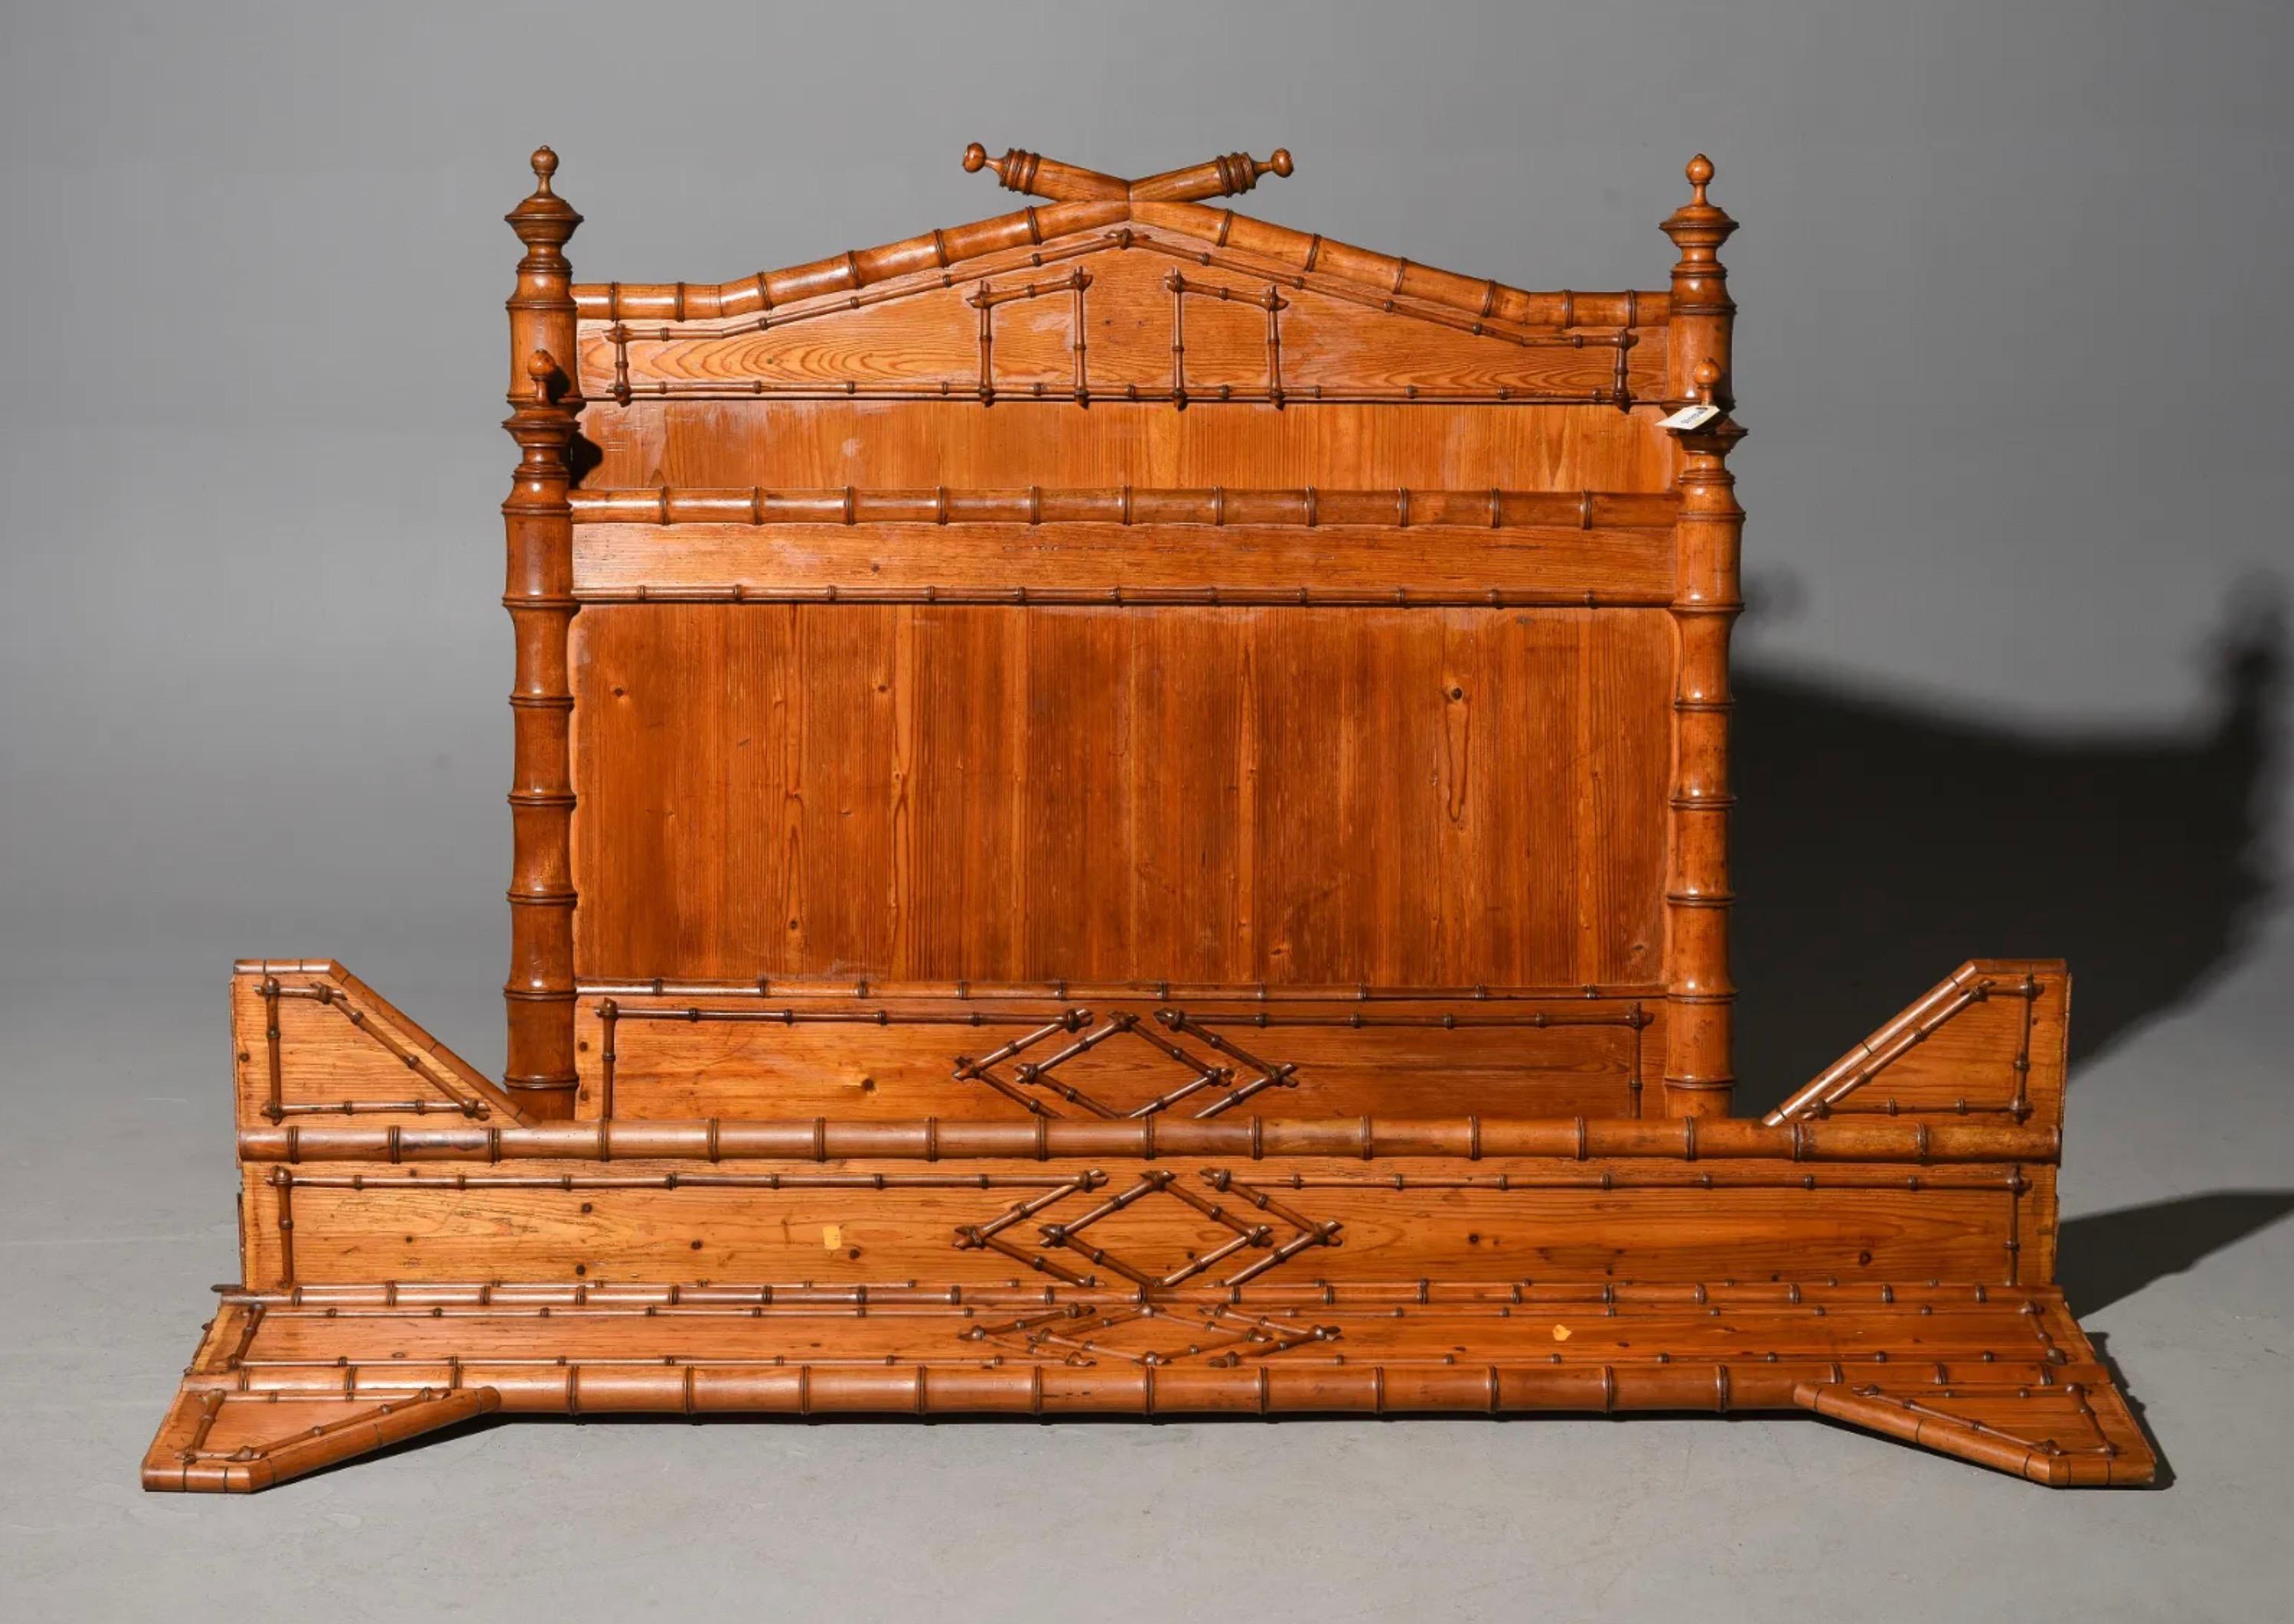 Beautiful French Faux Bamboo Bed with Rails - Rails are 73 inches long each - This bed is a European Size which can easily be converted to an American size by removing the rails and attaching the headboard and footboard to a universal metal bed